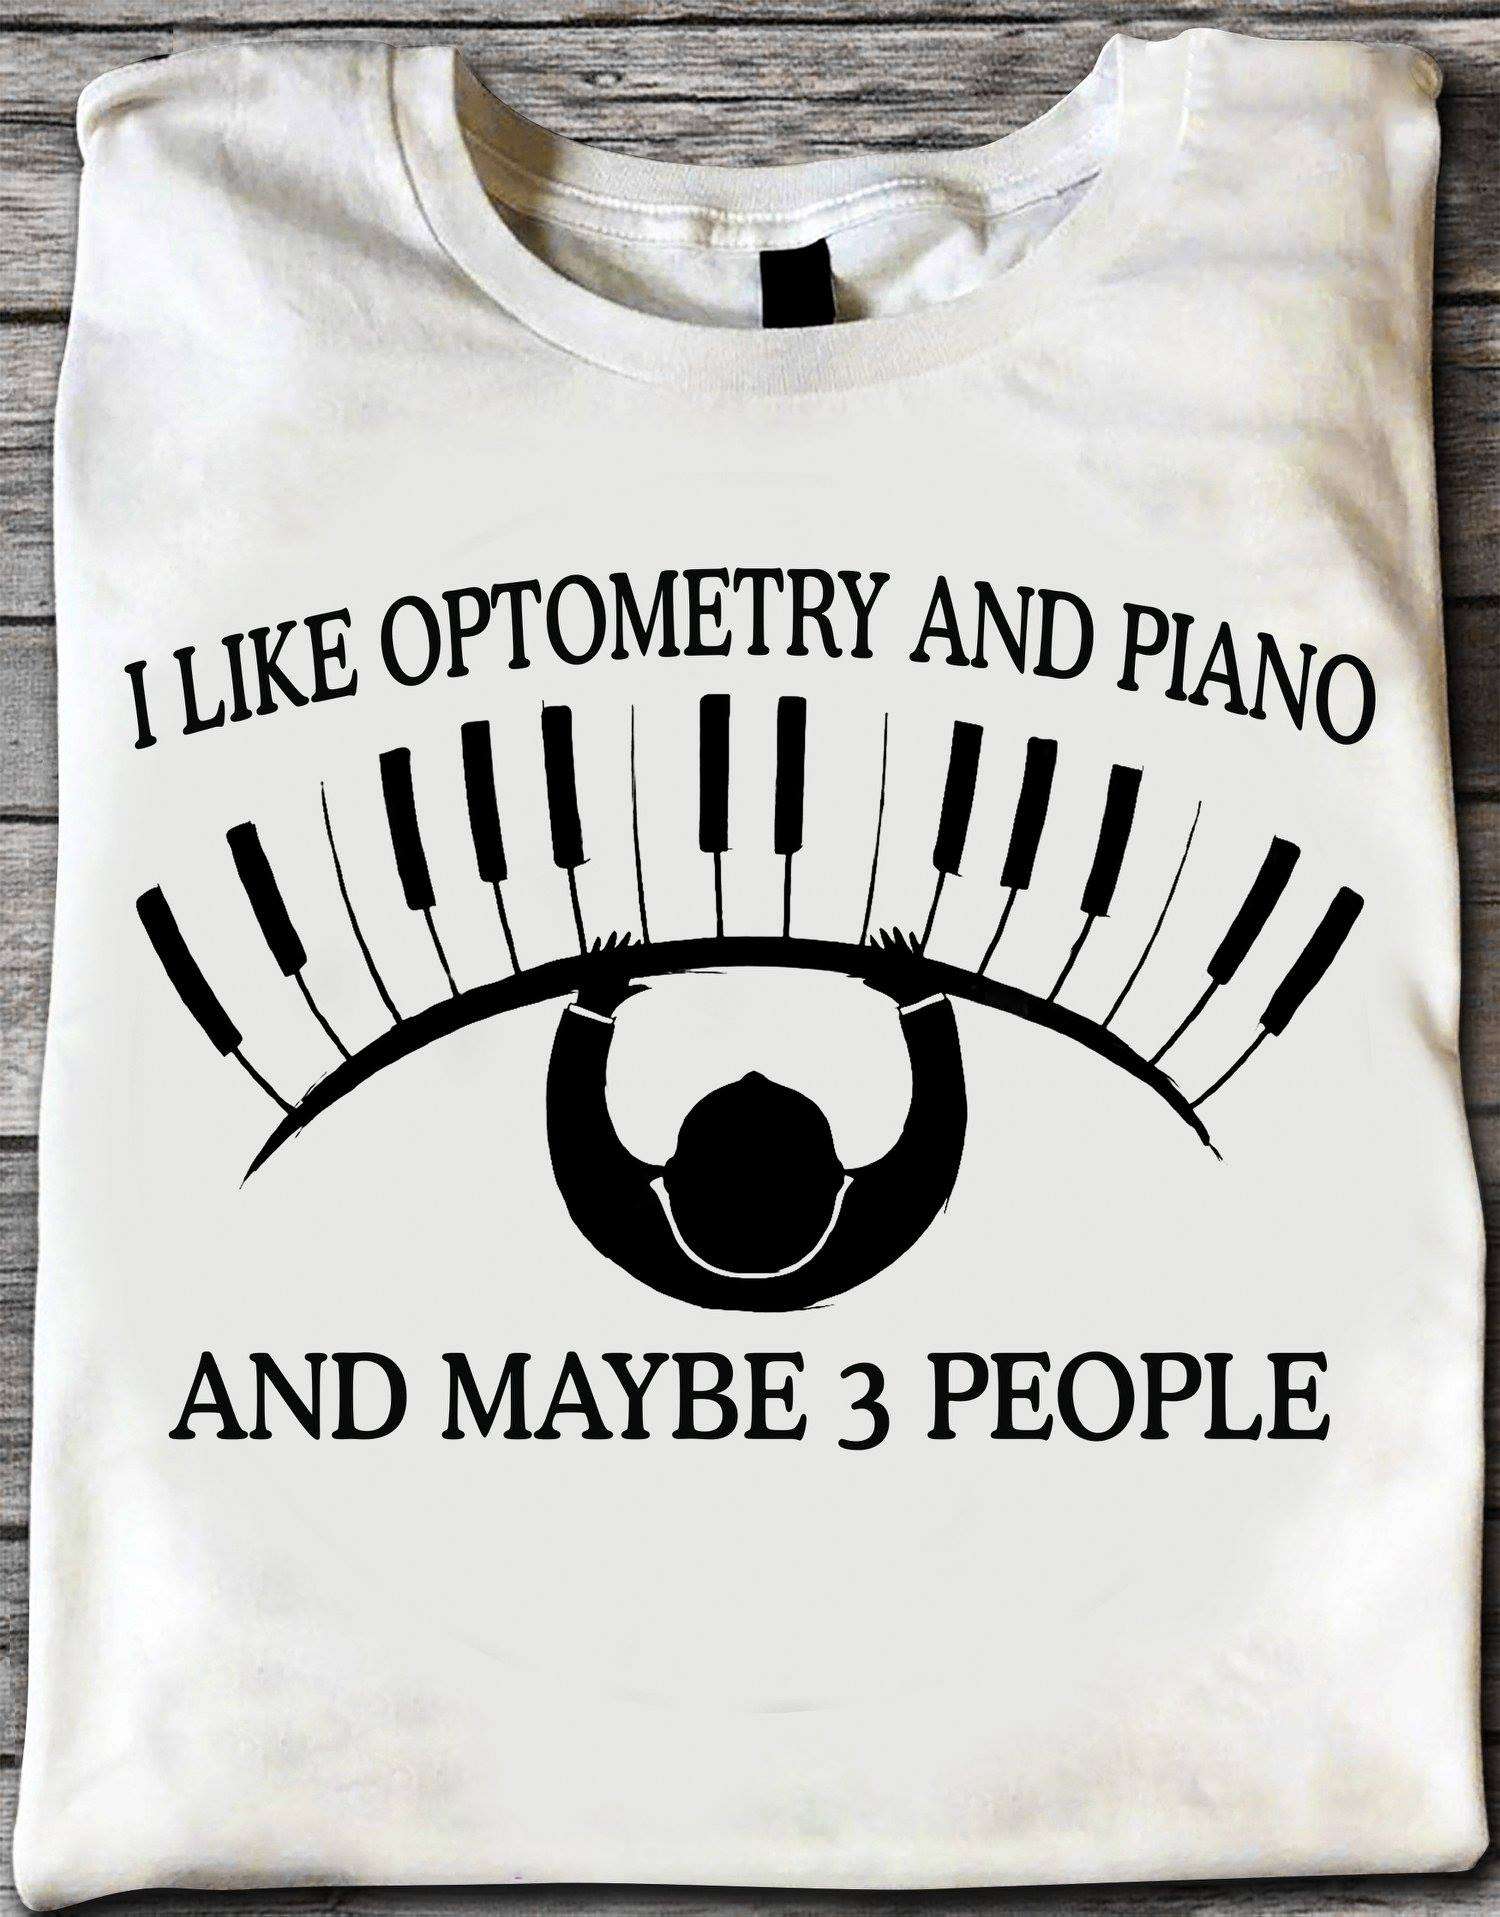 I like optometry and piano and maybe 3 people - T-shirt for pianists, eye care professional